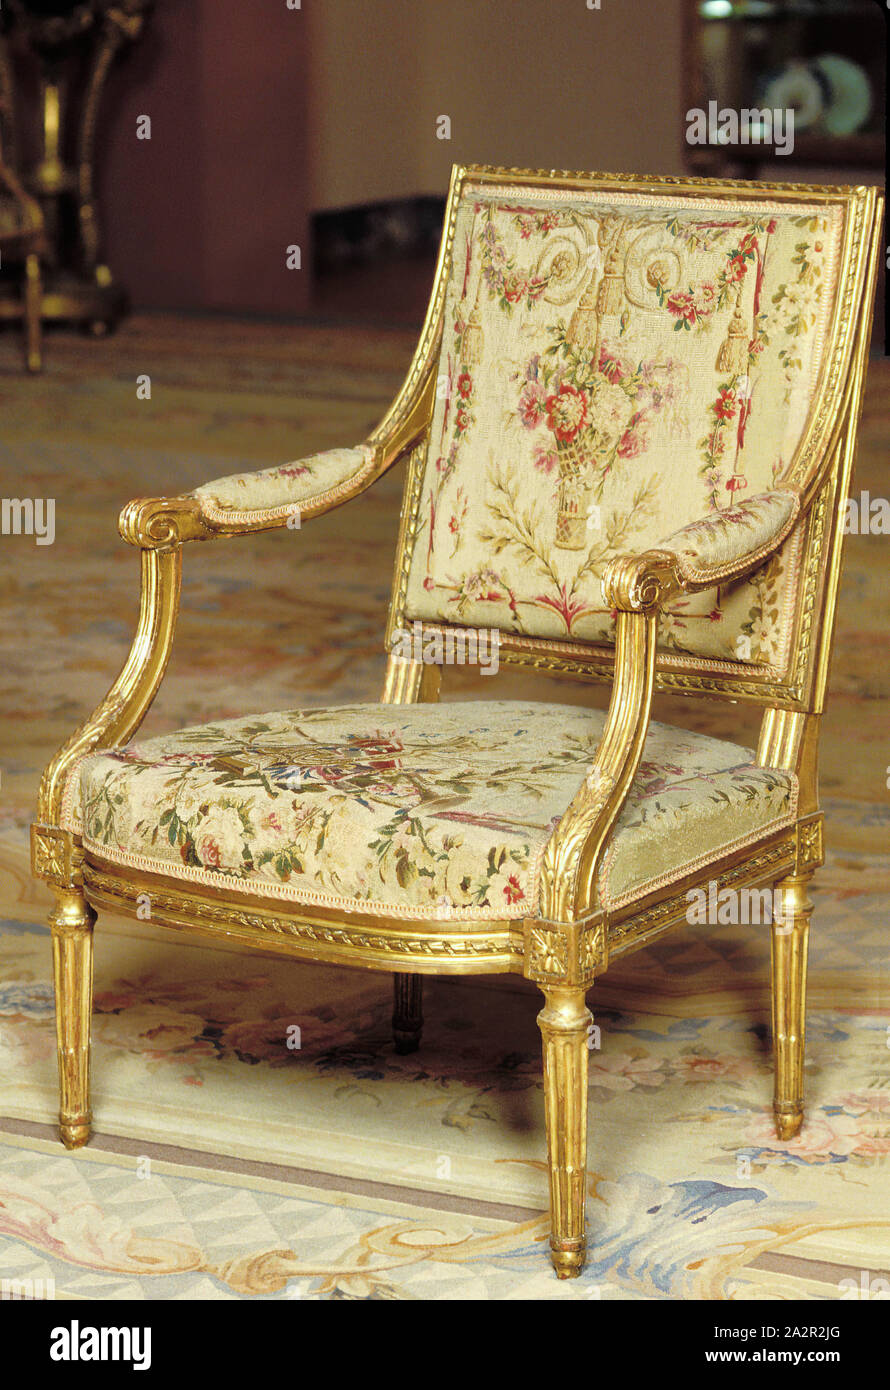 Georges Jacob, French, 1739-1814, Arm Chair, c. 1780/1785, carved and gilded beechwood frame, wool and silk upholstery (Beauvais tapestry), 36 x 25 1/2 x 22 in Stock Photo